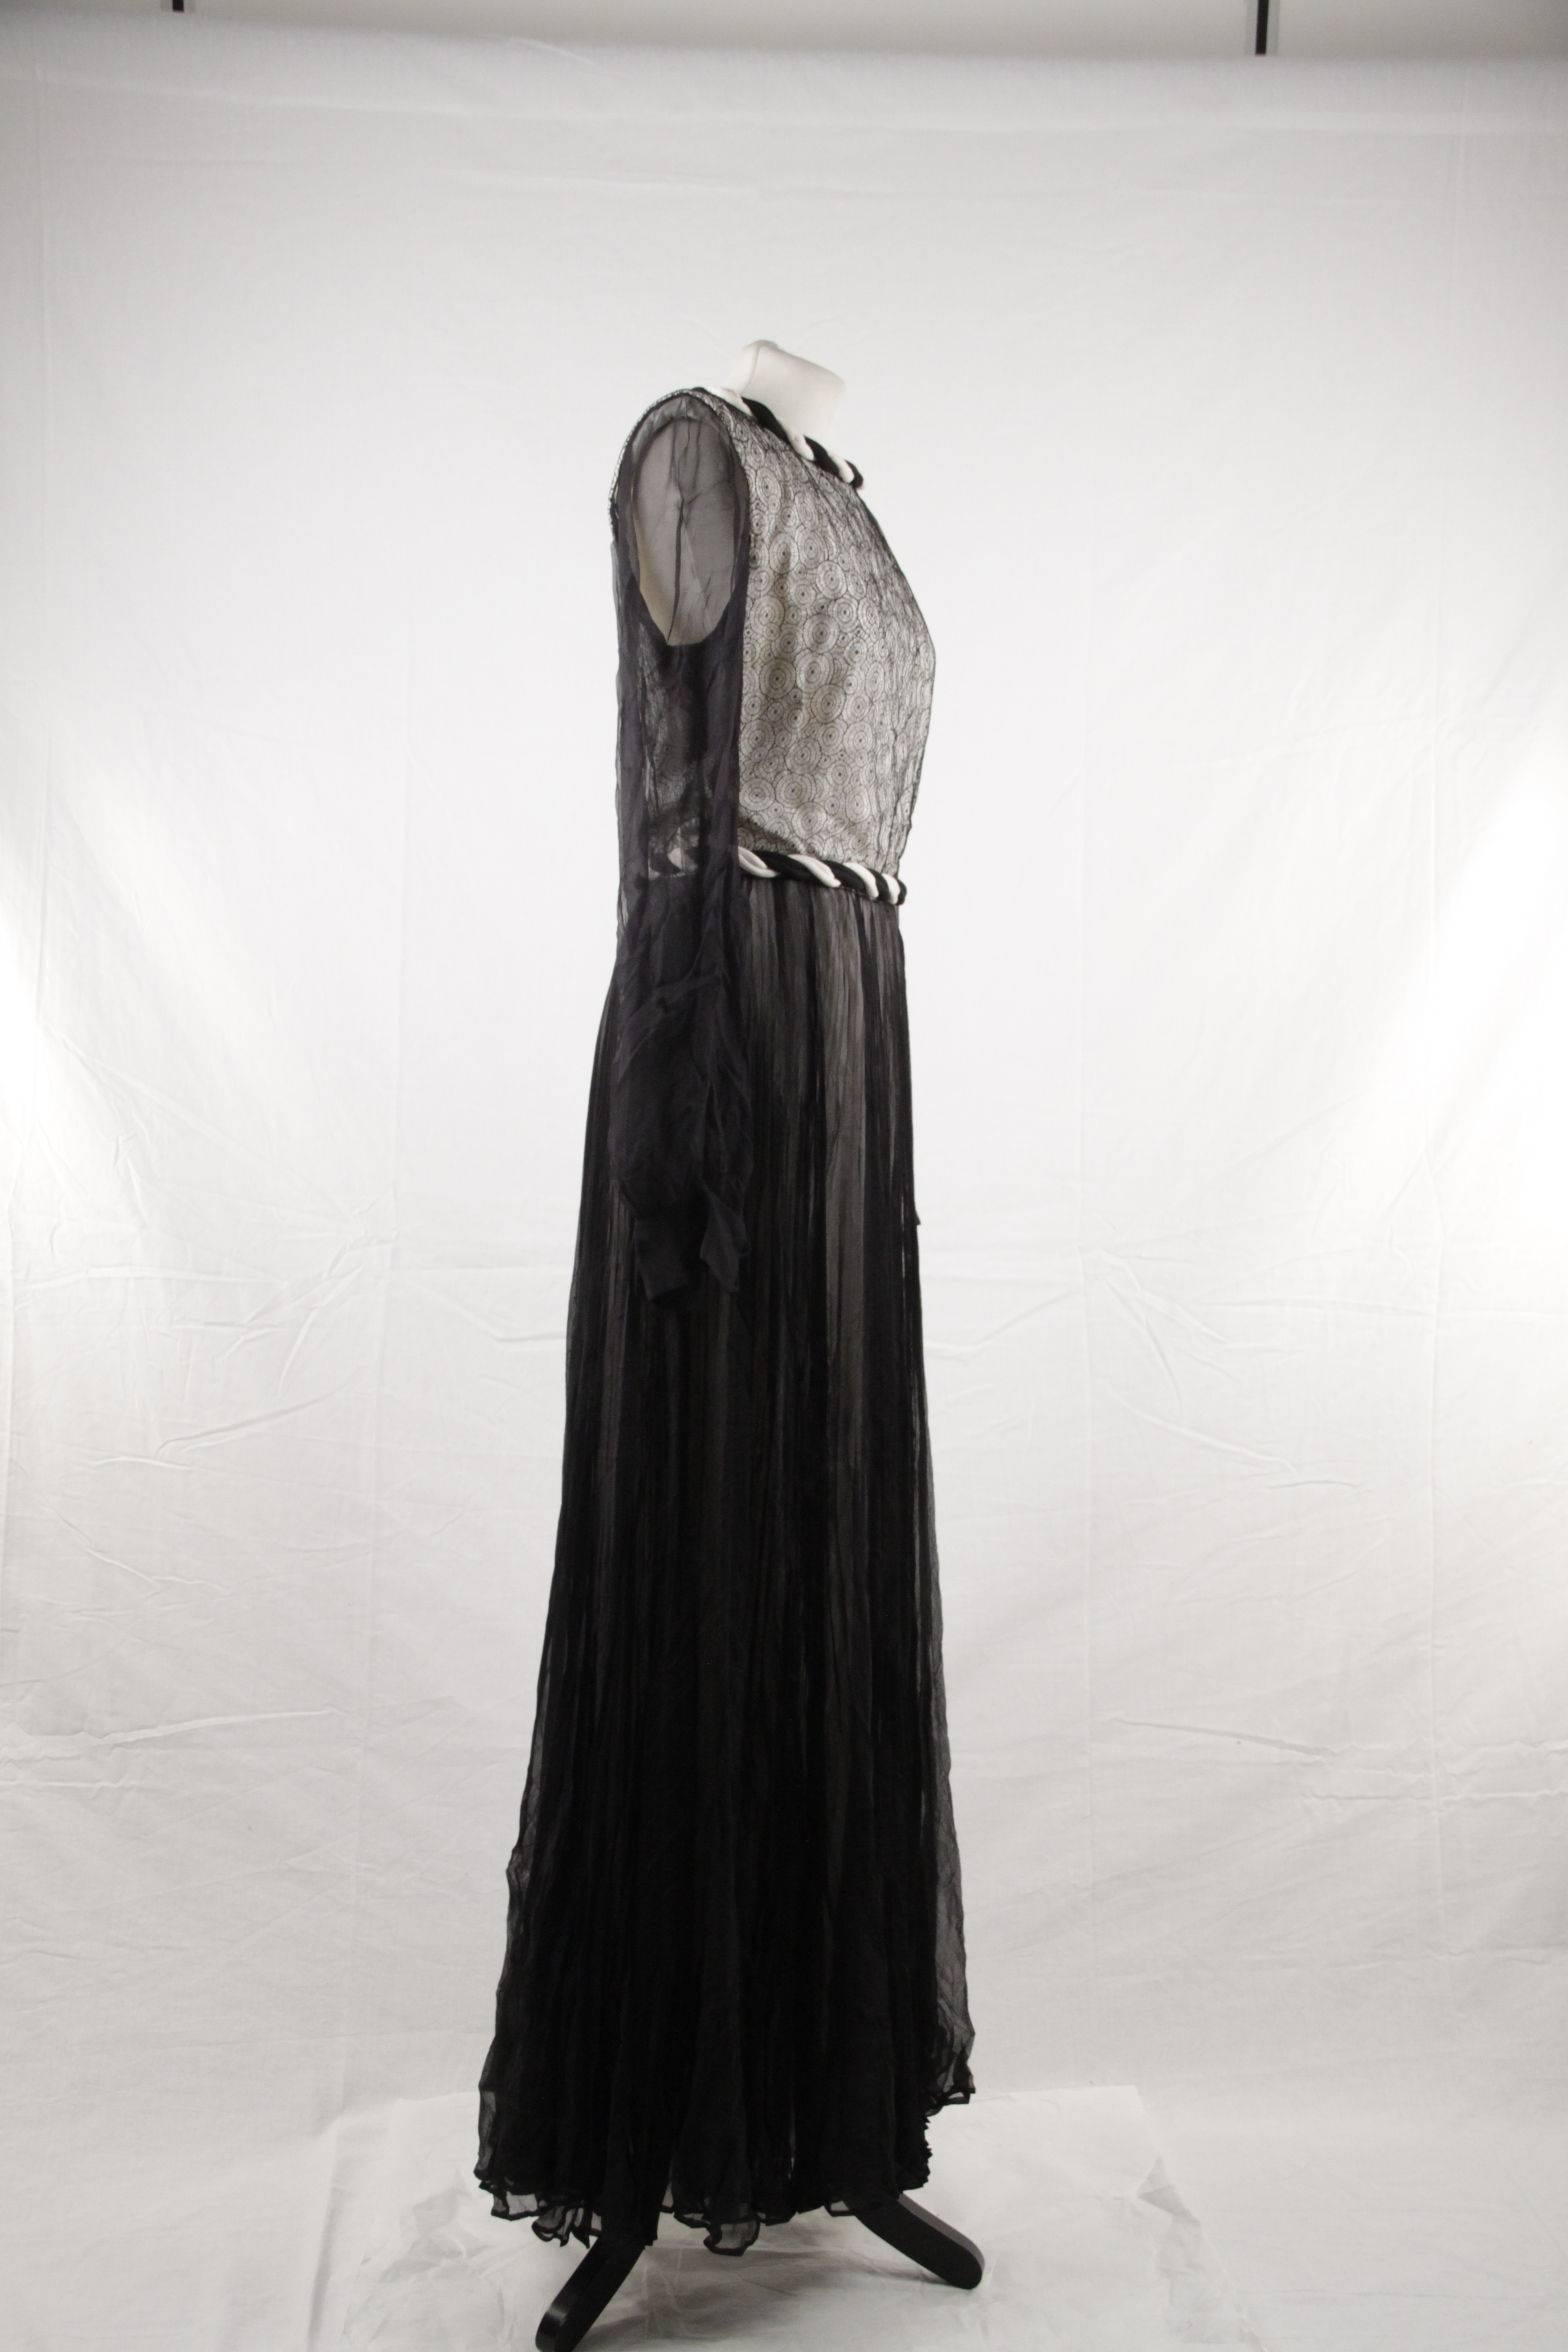 ANDRE LAUG Vintage Black & White GOWN Long Sleeve EVENING DRESS 1